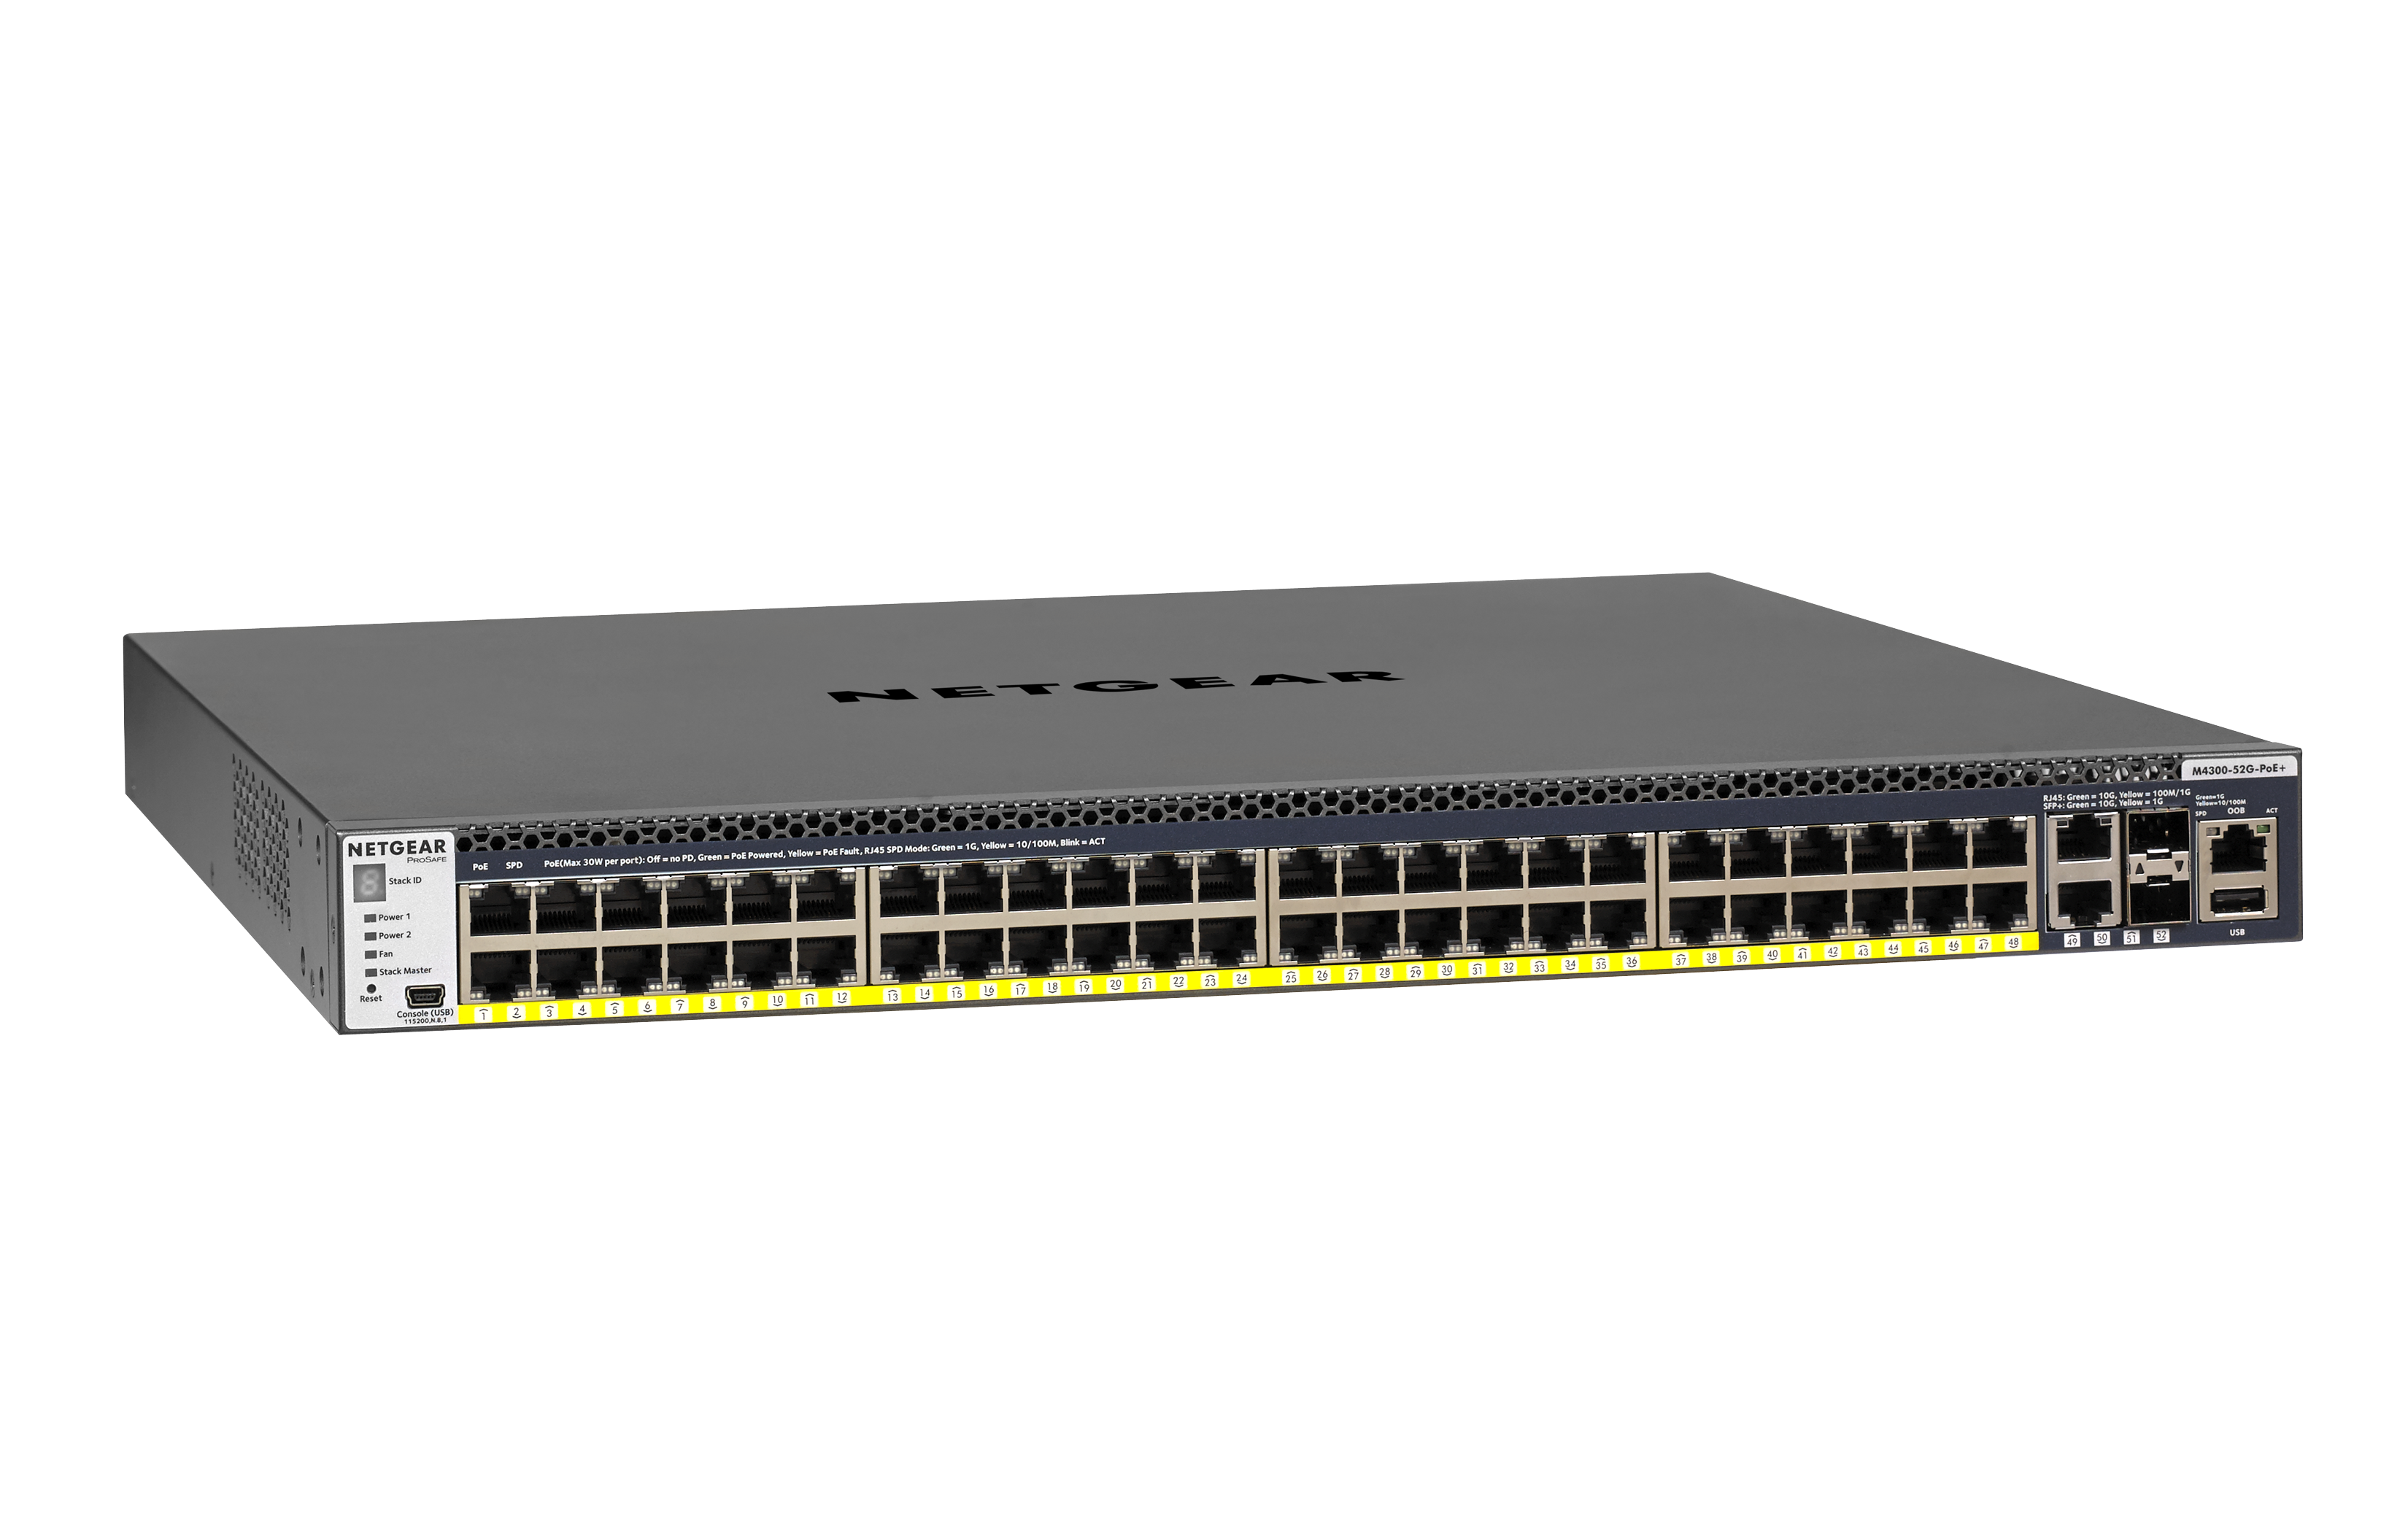 NETGEAR M4300-52G-PoE+ (550W PSU) Stackable Managed Switch (GSM4352PA) (GSM4352PA-100NES 606449112832 Networking Equipment Switches Gigabit Switches) photo